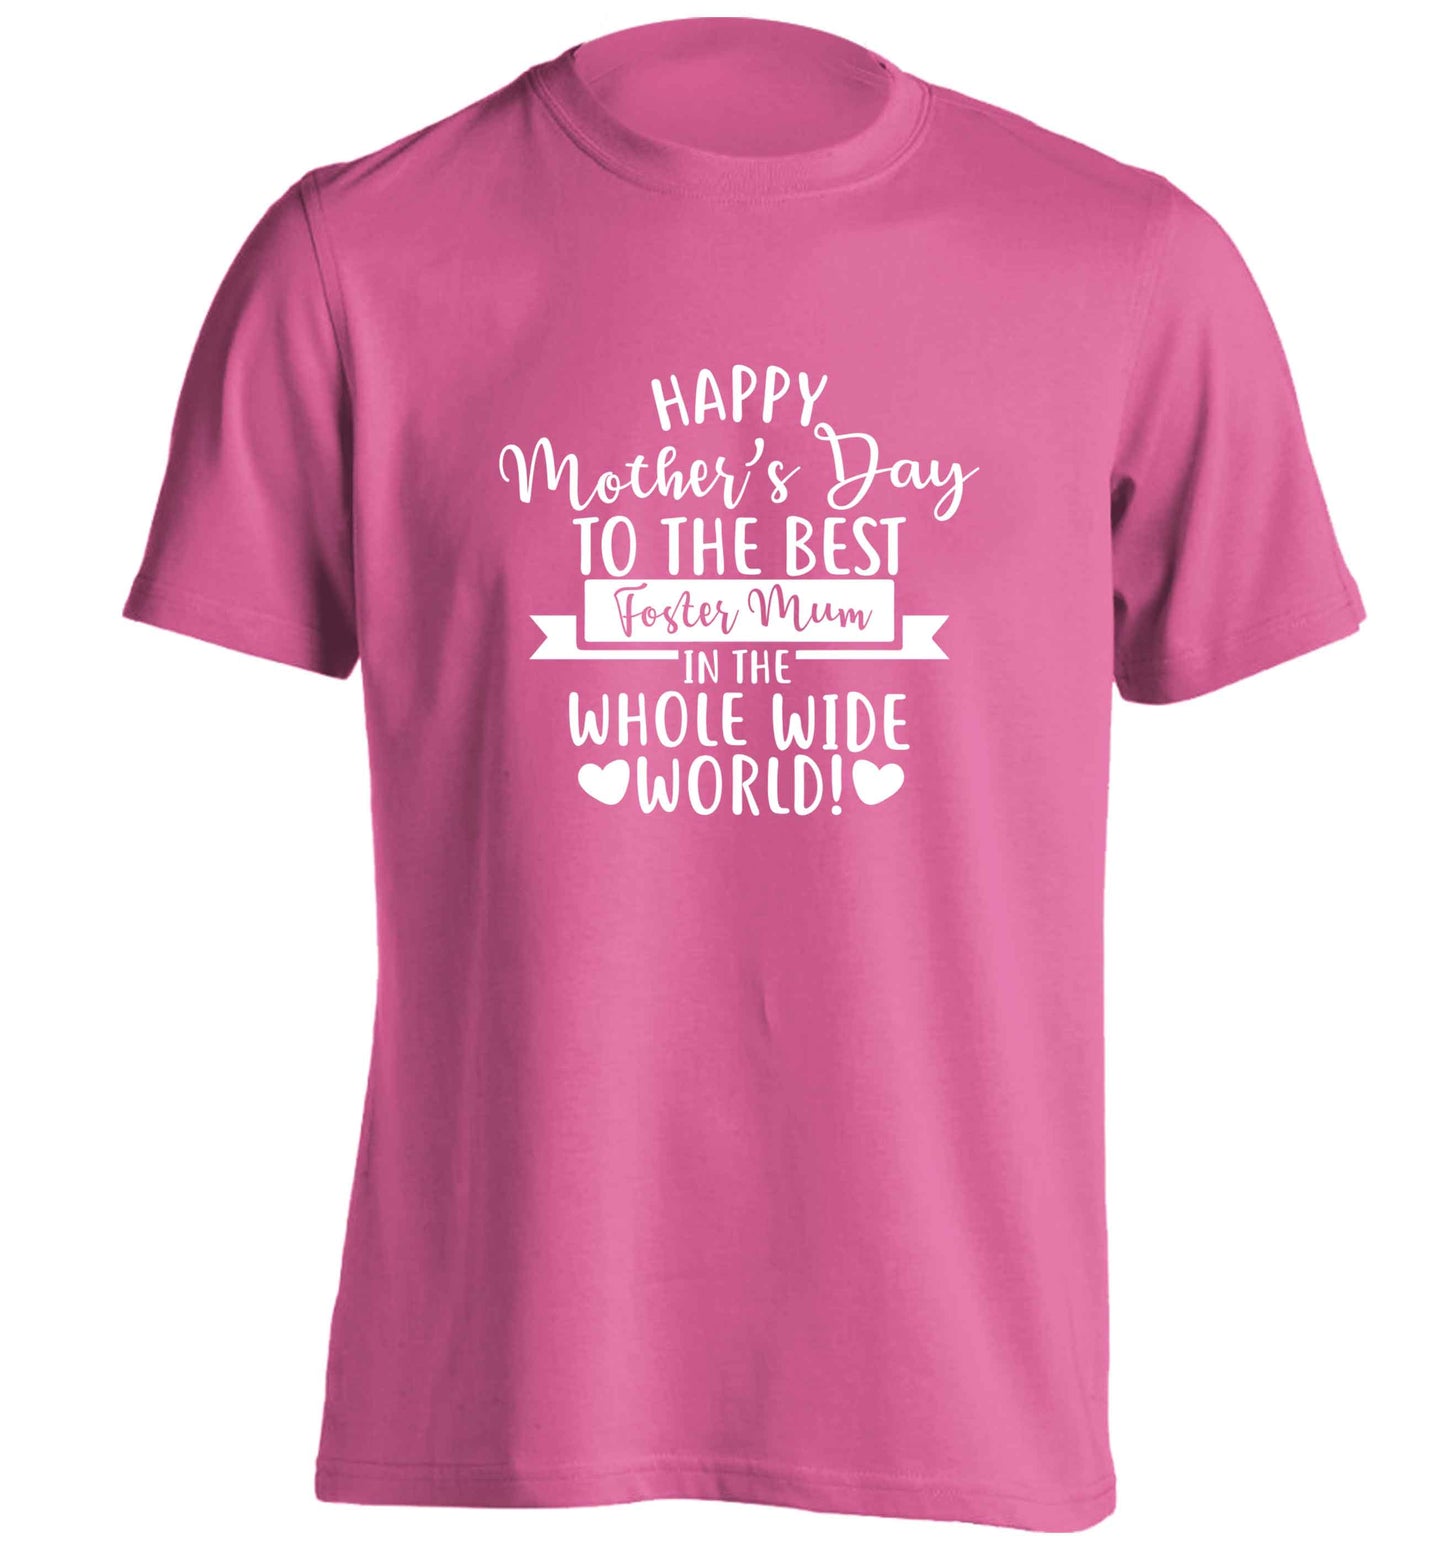 Happy mother's day to the best foster mum in the world adults unisex pink Tshirt 2XL